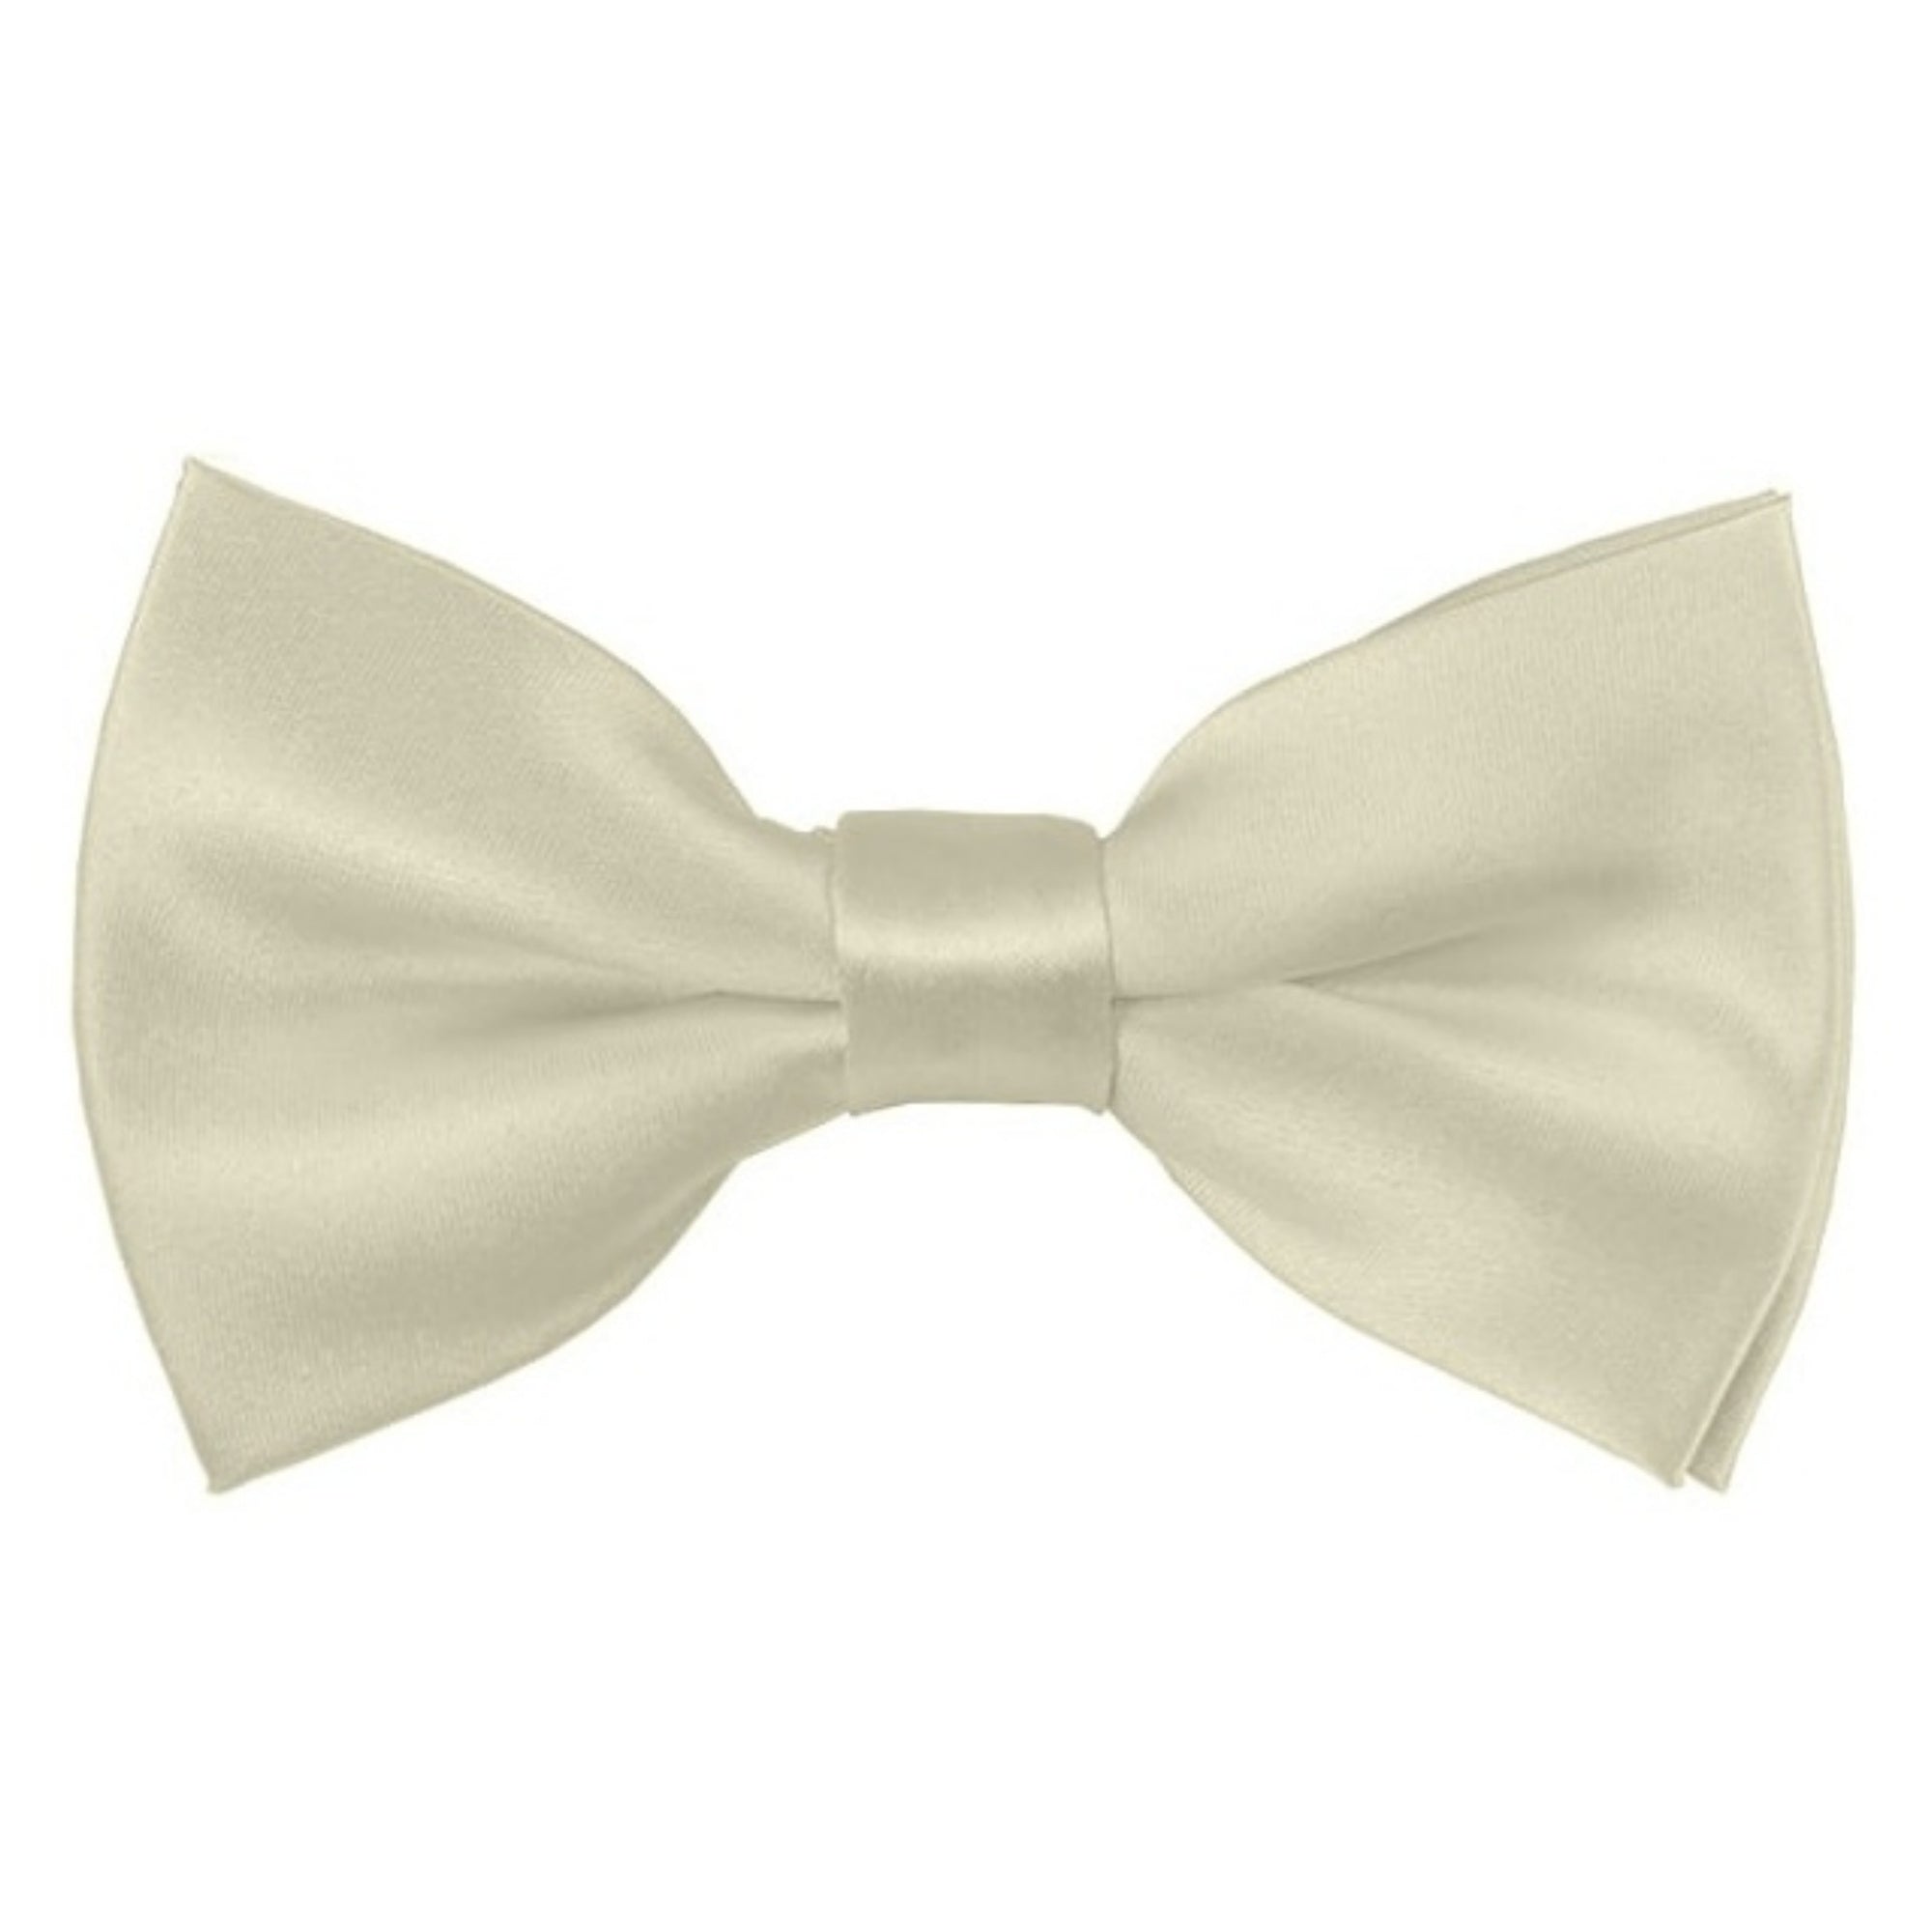 TheDapperTie Men's Solid Color 2.5 W And 4.5 L Inch Pre-Tied adjustable Bow Ties Men's Solid Color Bow Tie TheDapperTie Cream  